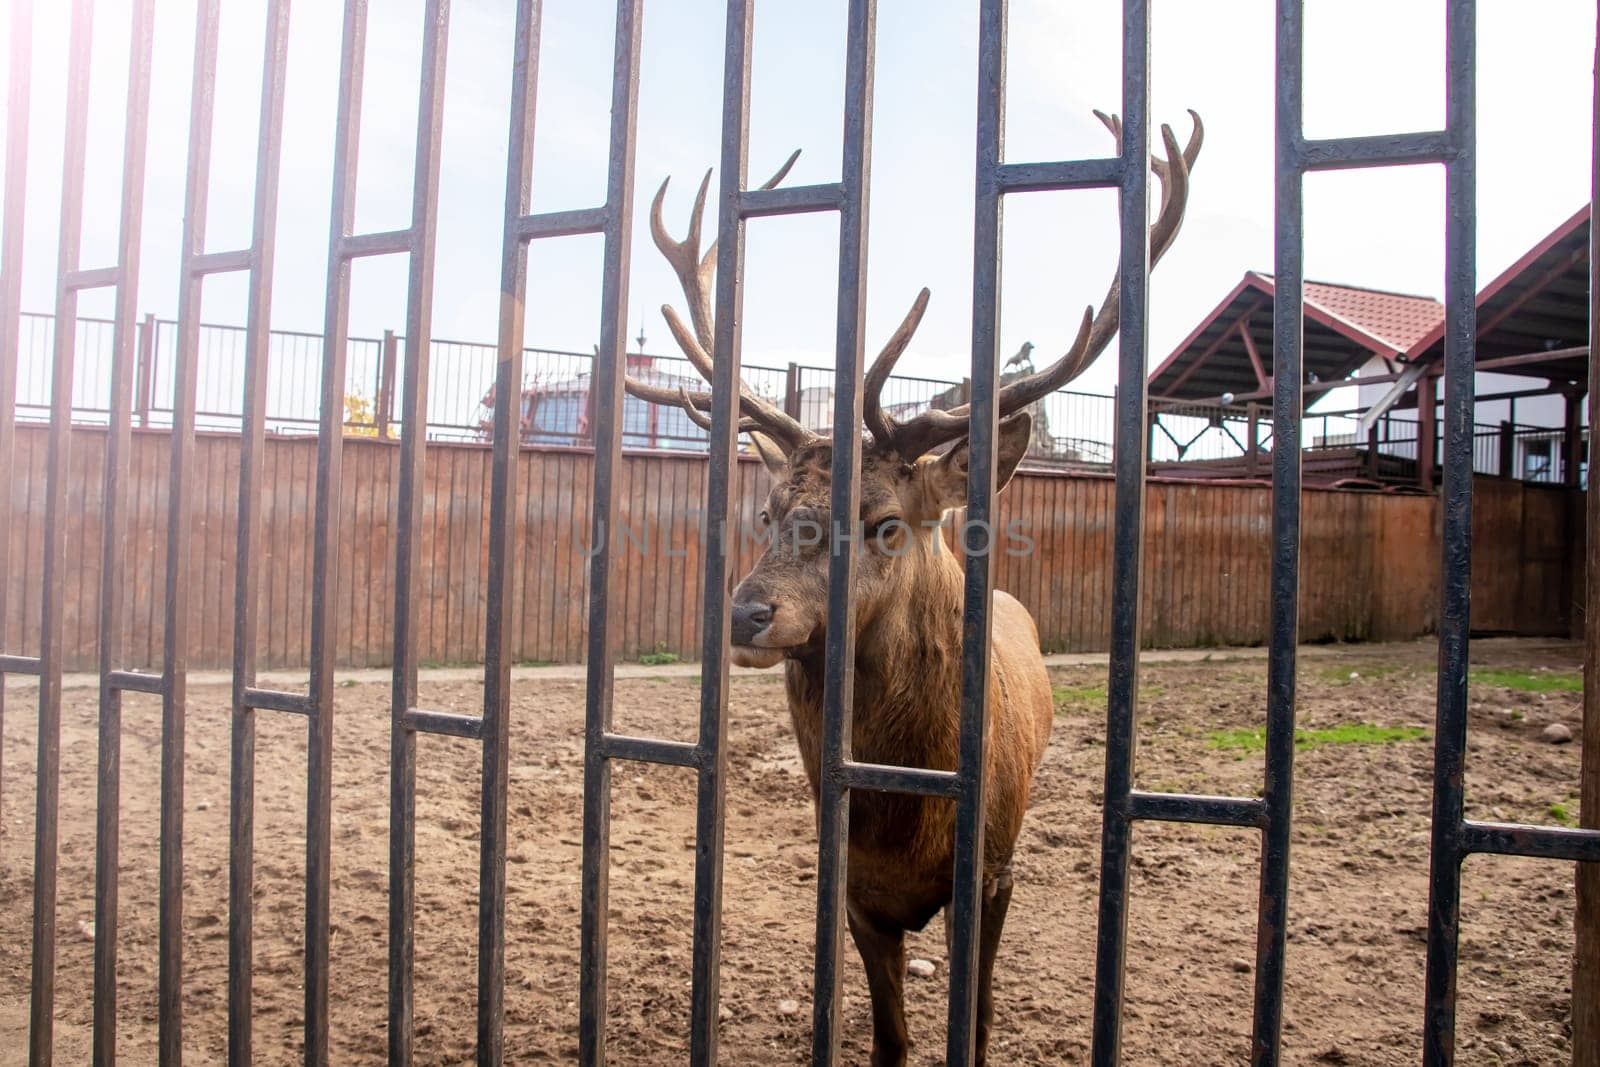 A deer behind the bars of an aviary by Vera1703